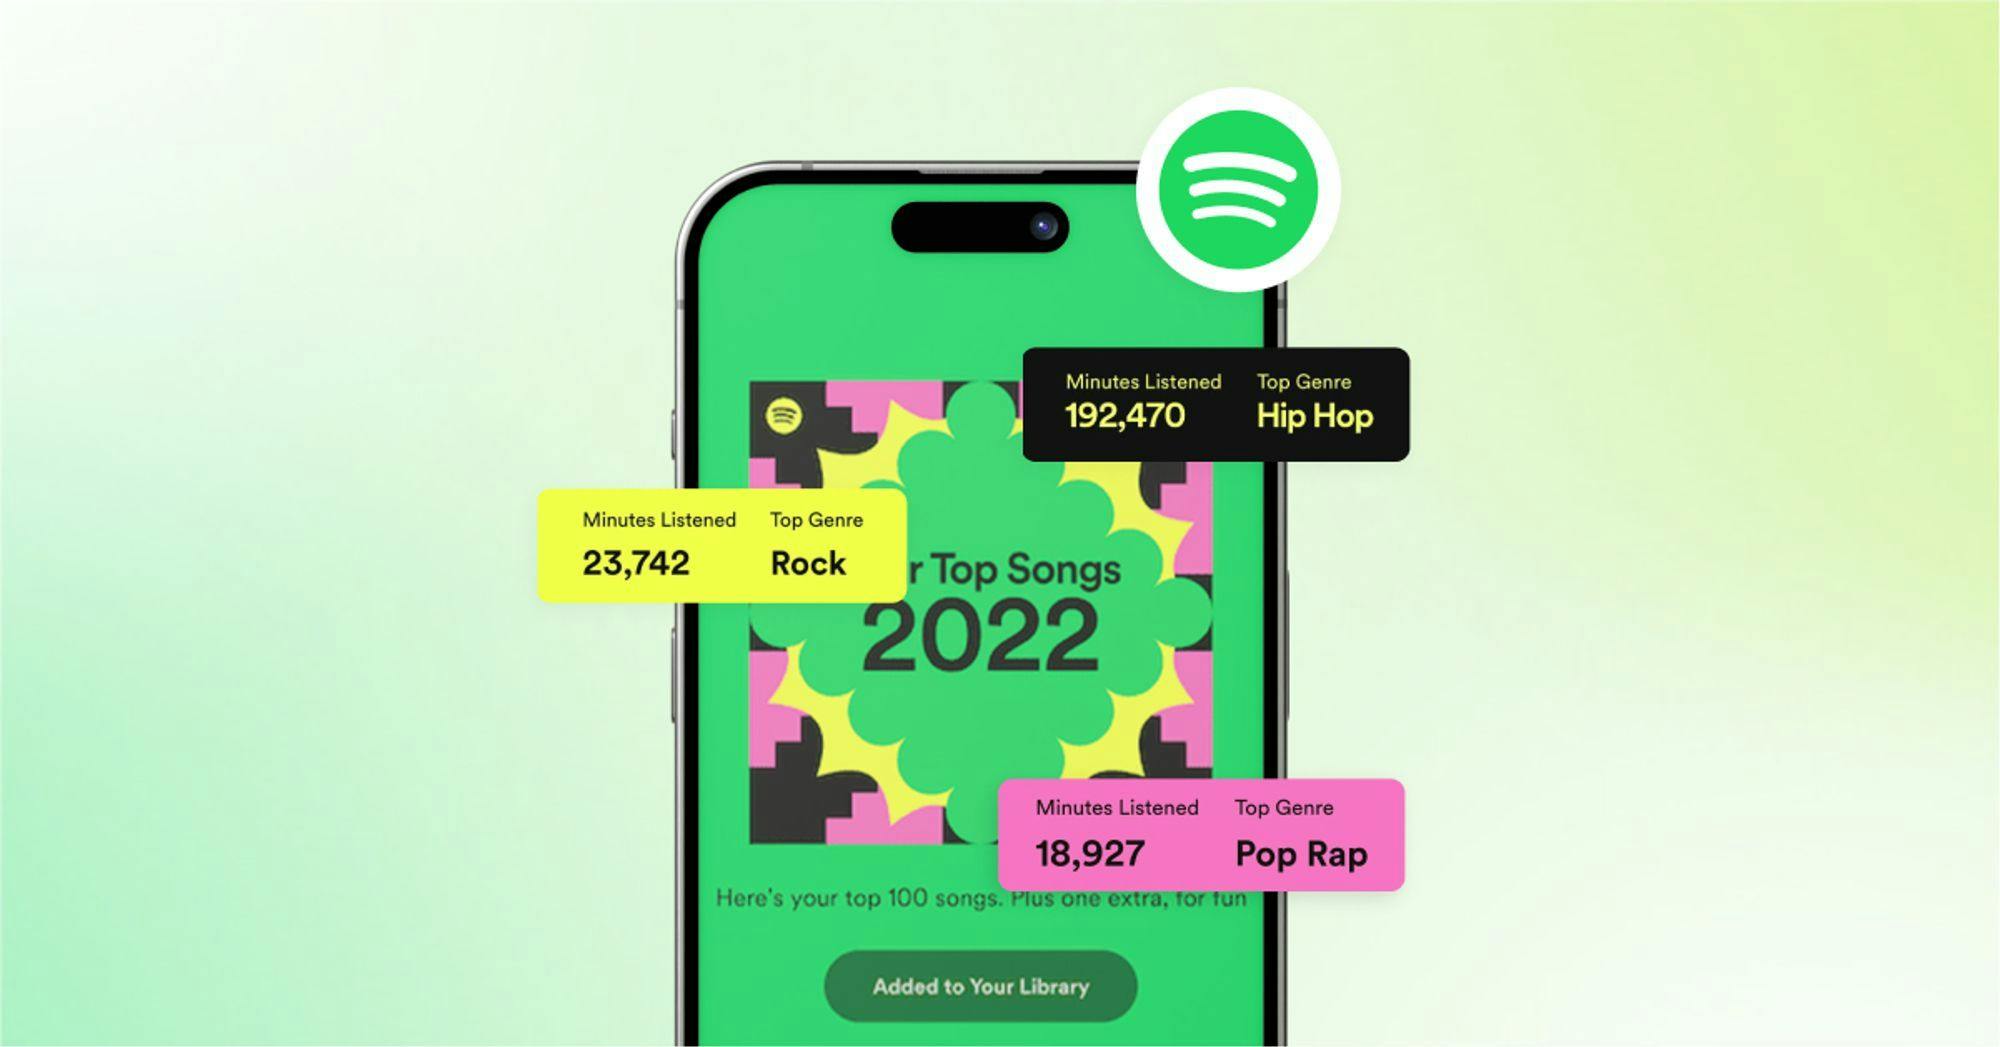 Image of Spotify Wrapped metrics appearing on an iPhone.